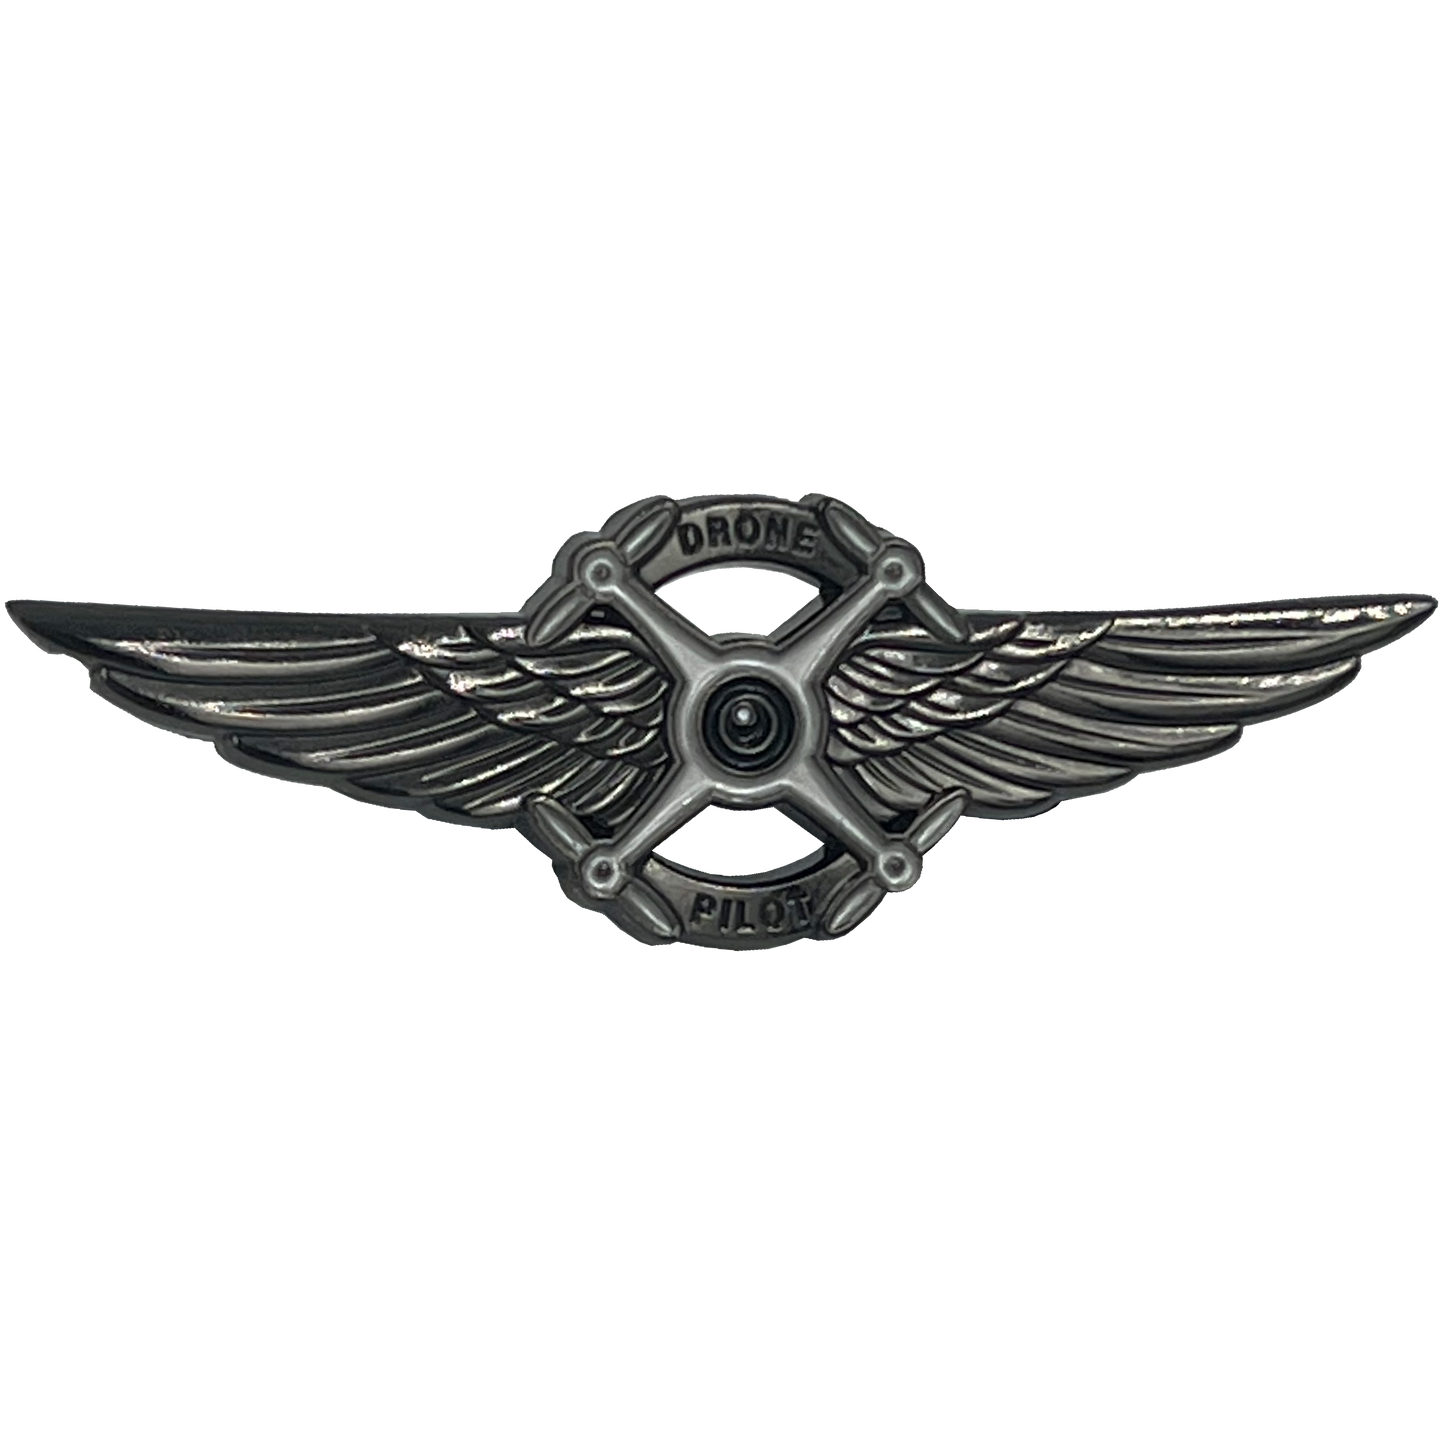 BL5-013 Full size UAS FAA Commercial Drone Pilot Wings pin Black Tactical